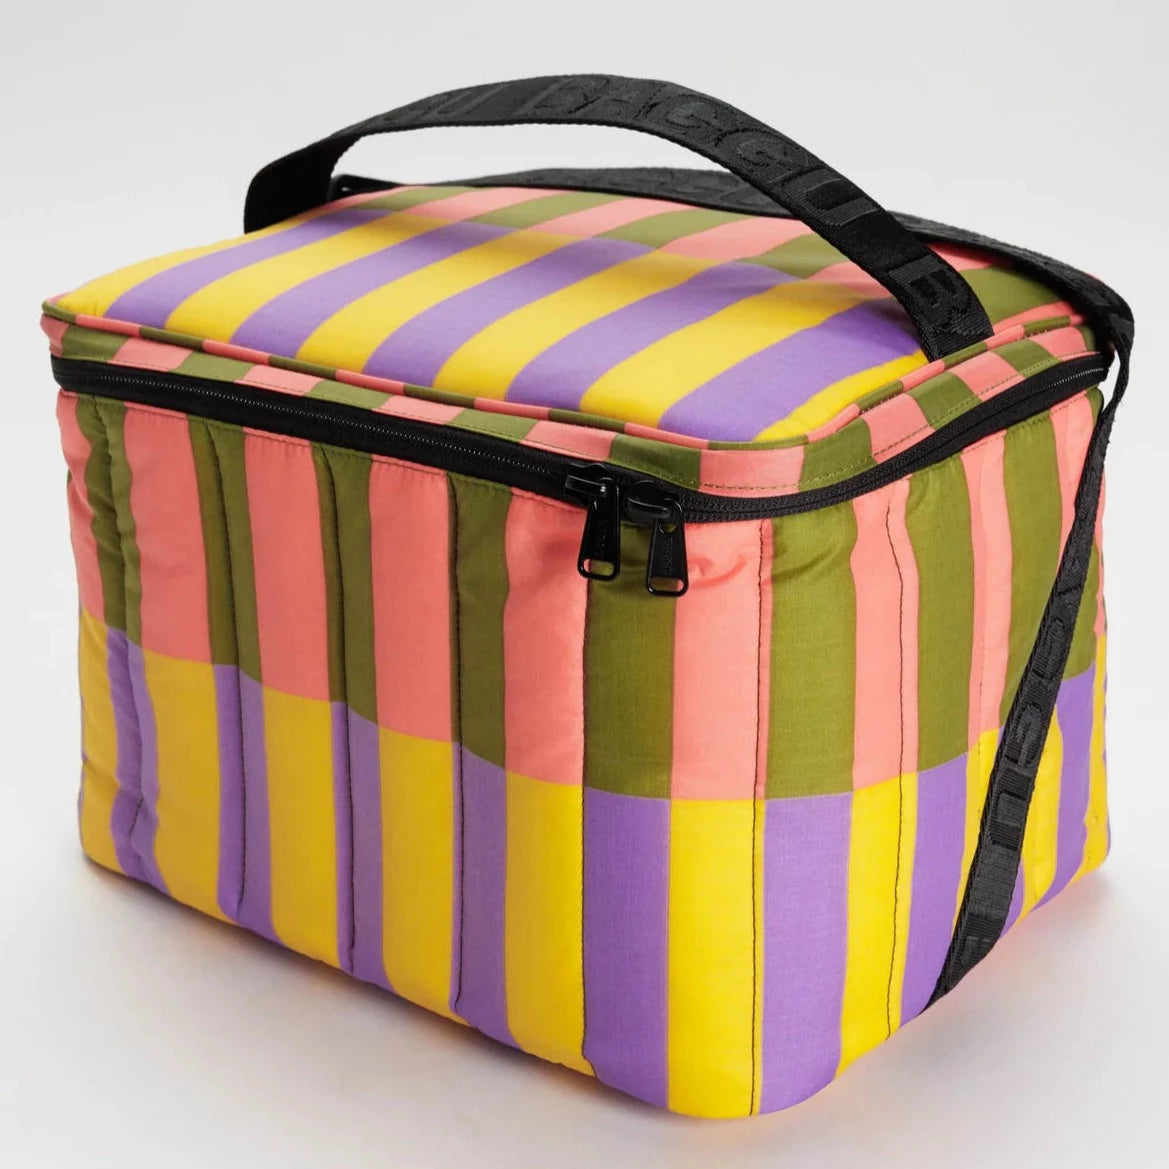 Large Stripe Colour Block Insulated Cooler Bag with De-bossed Black Strap with "BAGGU" text